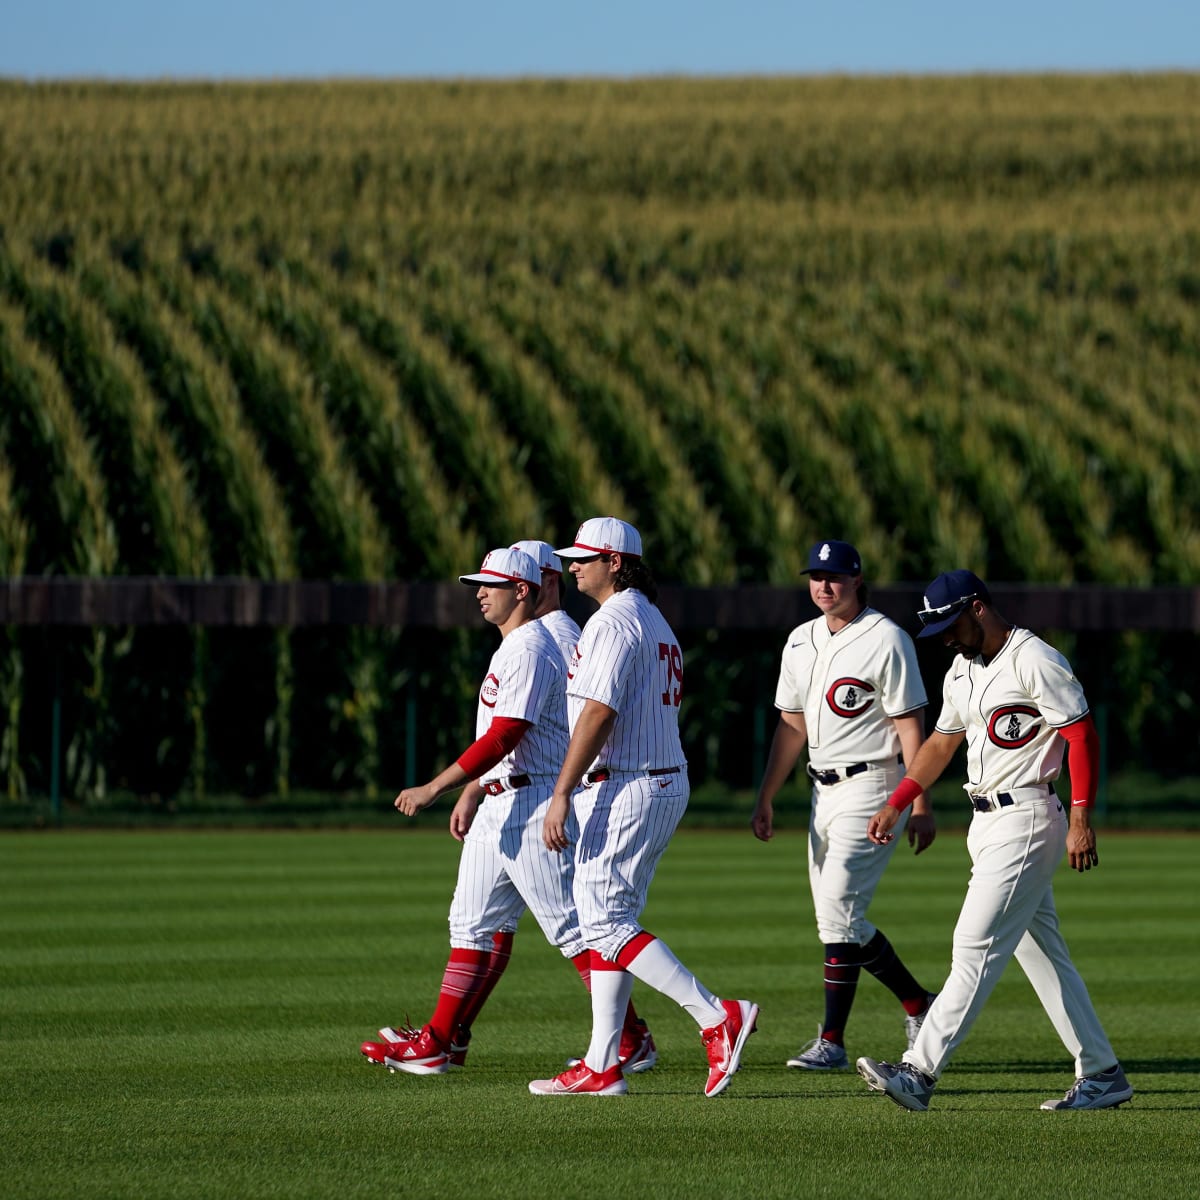 Cubs-Reds Field of Dreams game delivered - Chicago Sun-Times